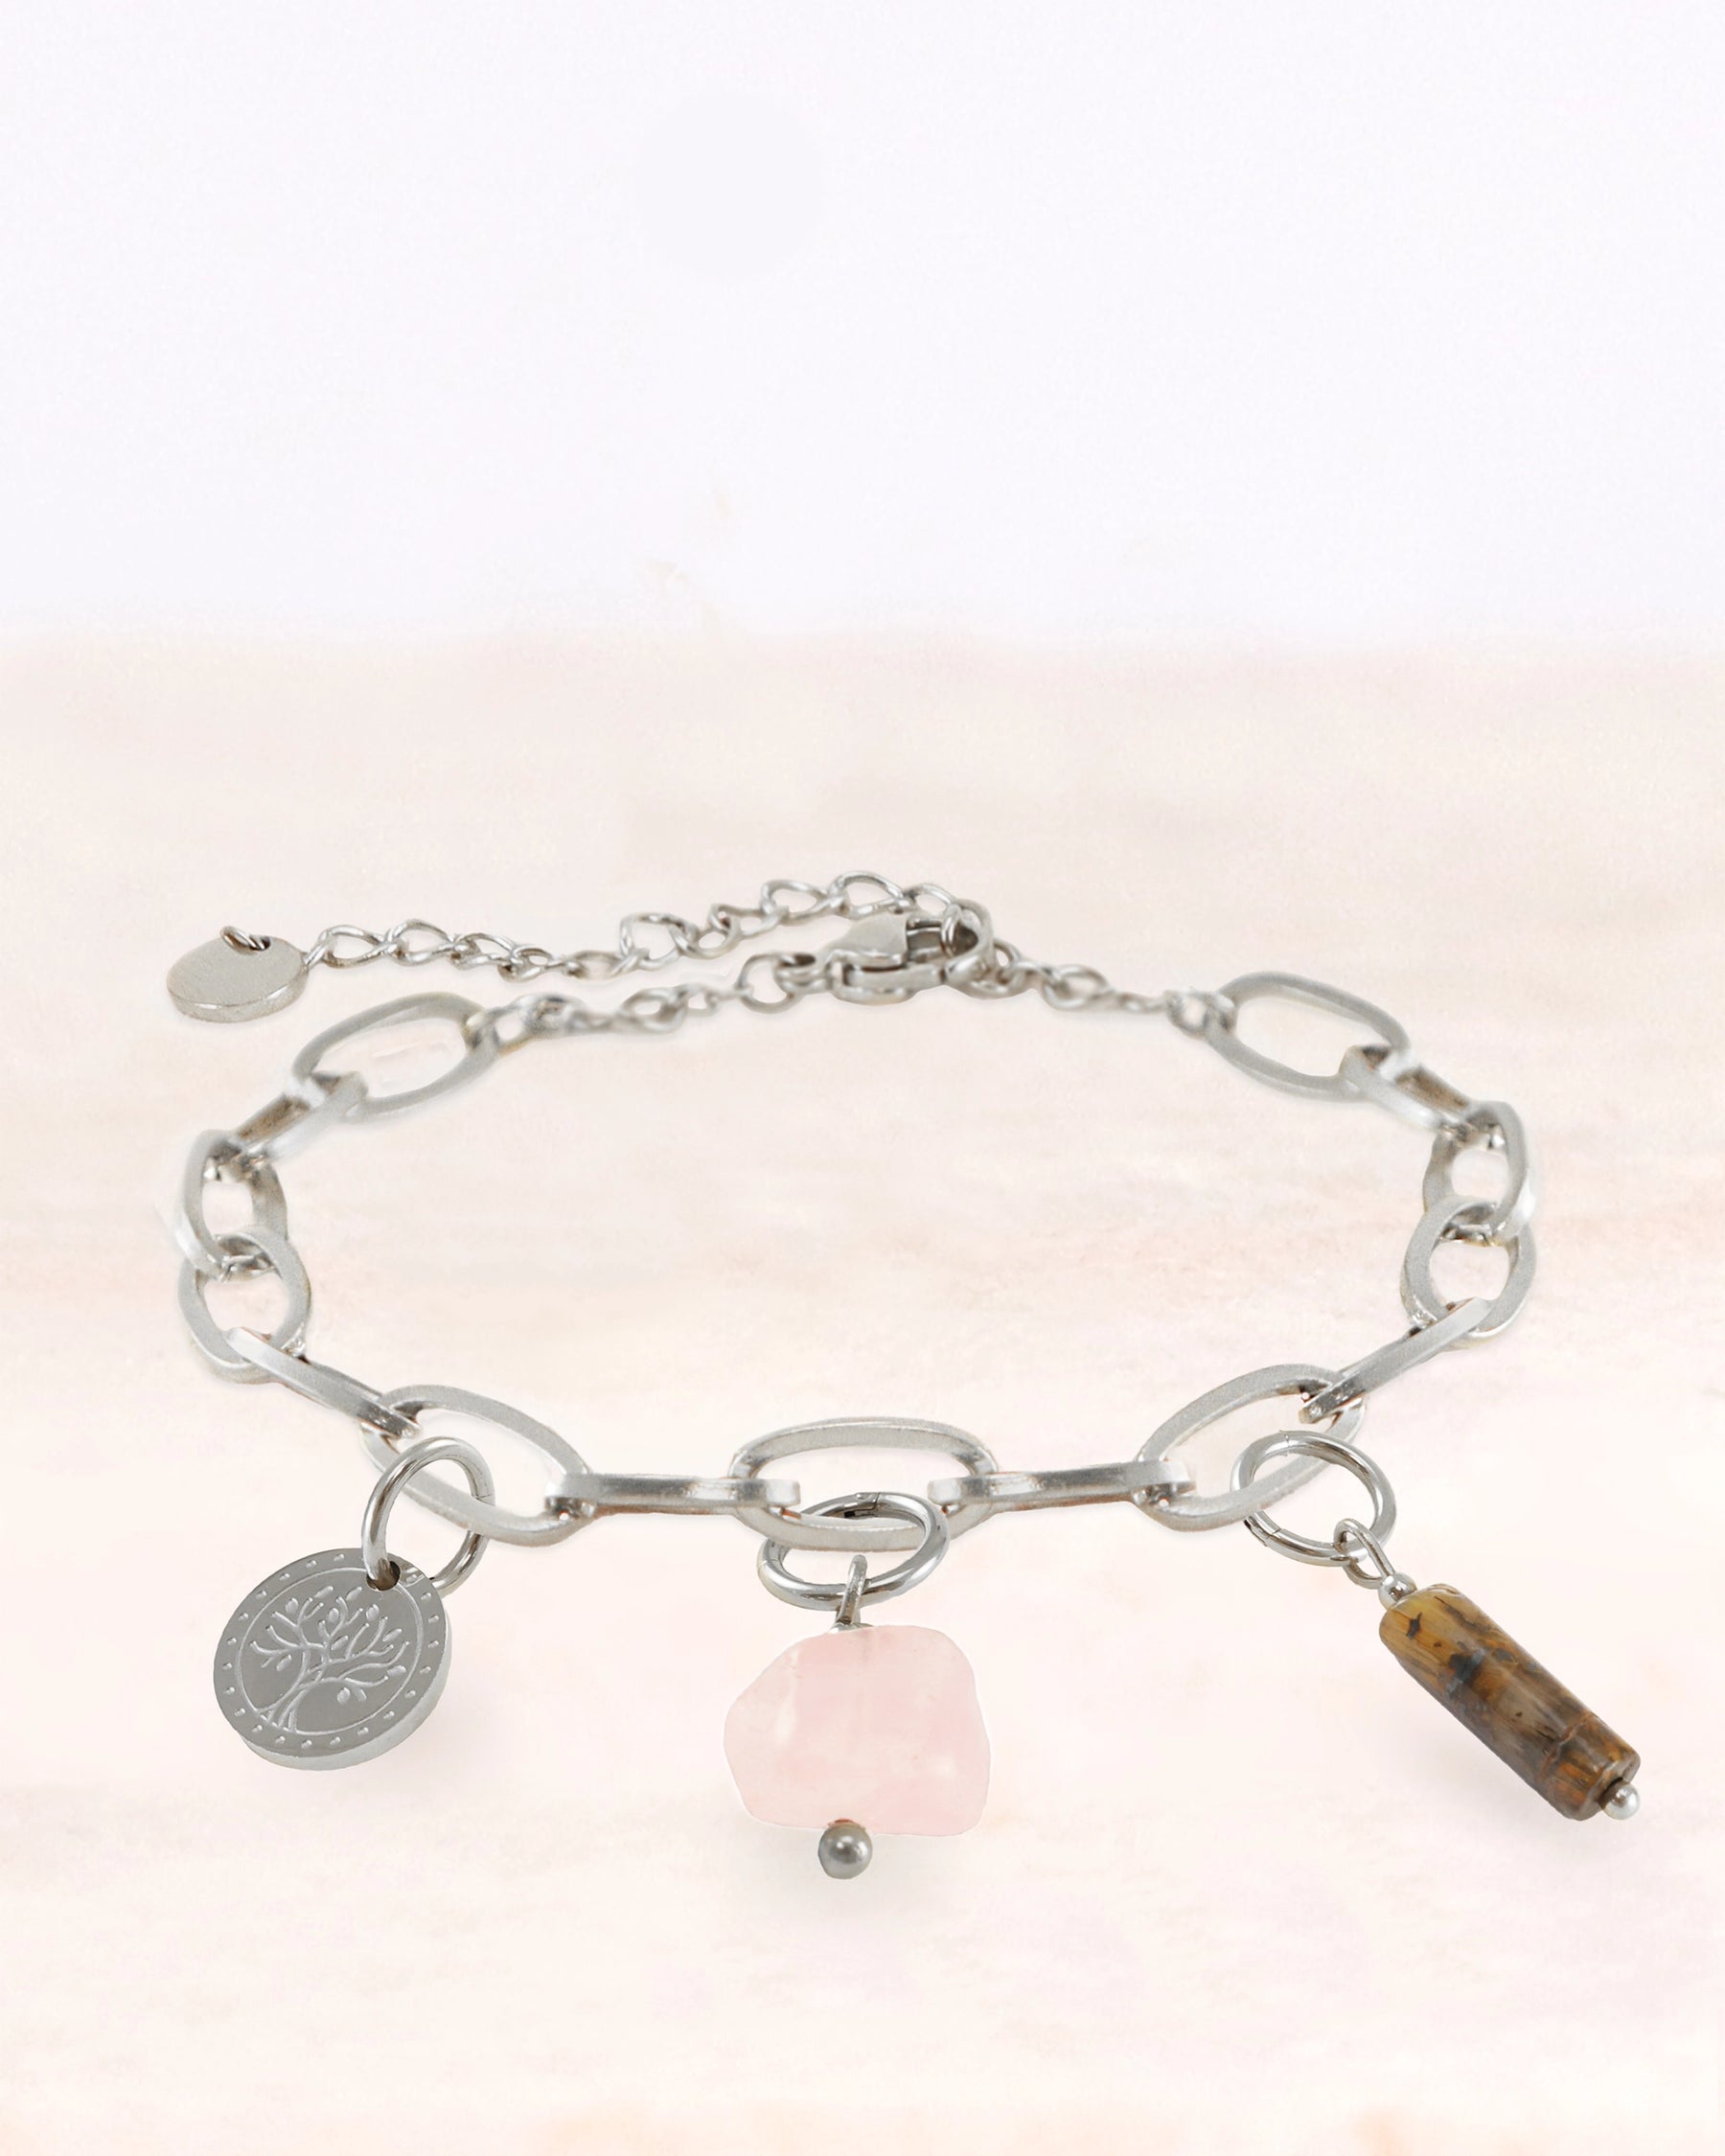 CUS® Jewellery set Yara bracelet with the charms Tree of Life, Rose Quartz and Tiger's Eye 